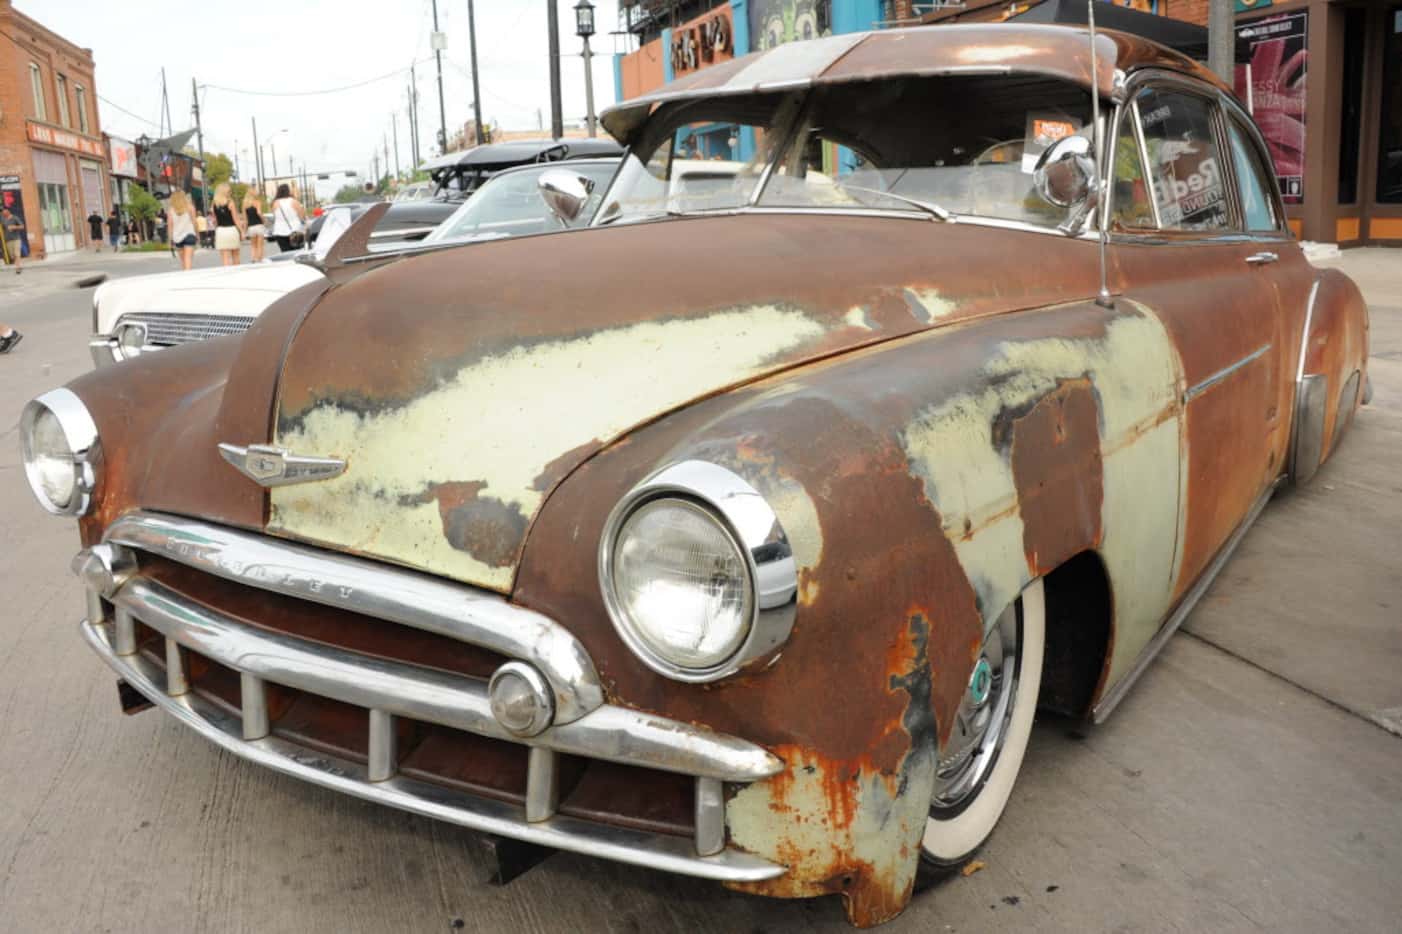 This 1949 Chevy features patina and is on display at the Invasion Car Show in Deep Ellum, TX...